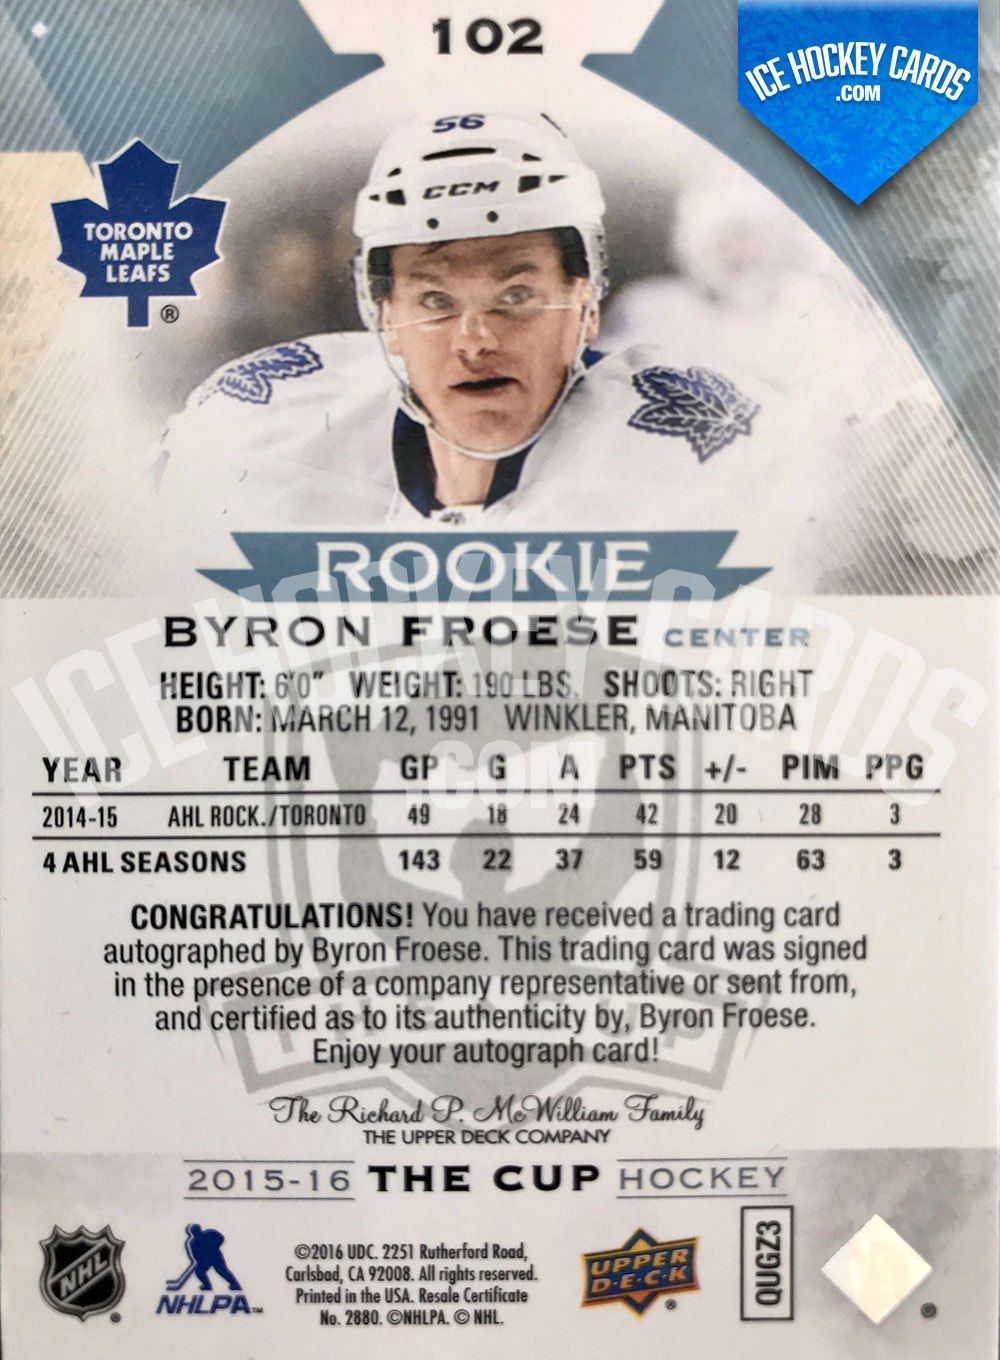 Upper Deck - The Cup 2015-16 - Byron Froese Rookie Auto RC back